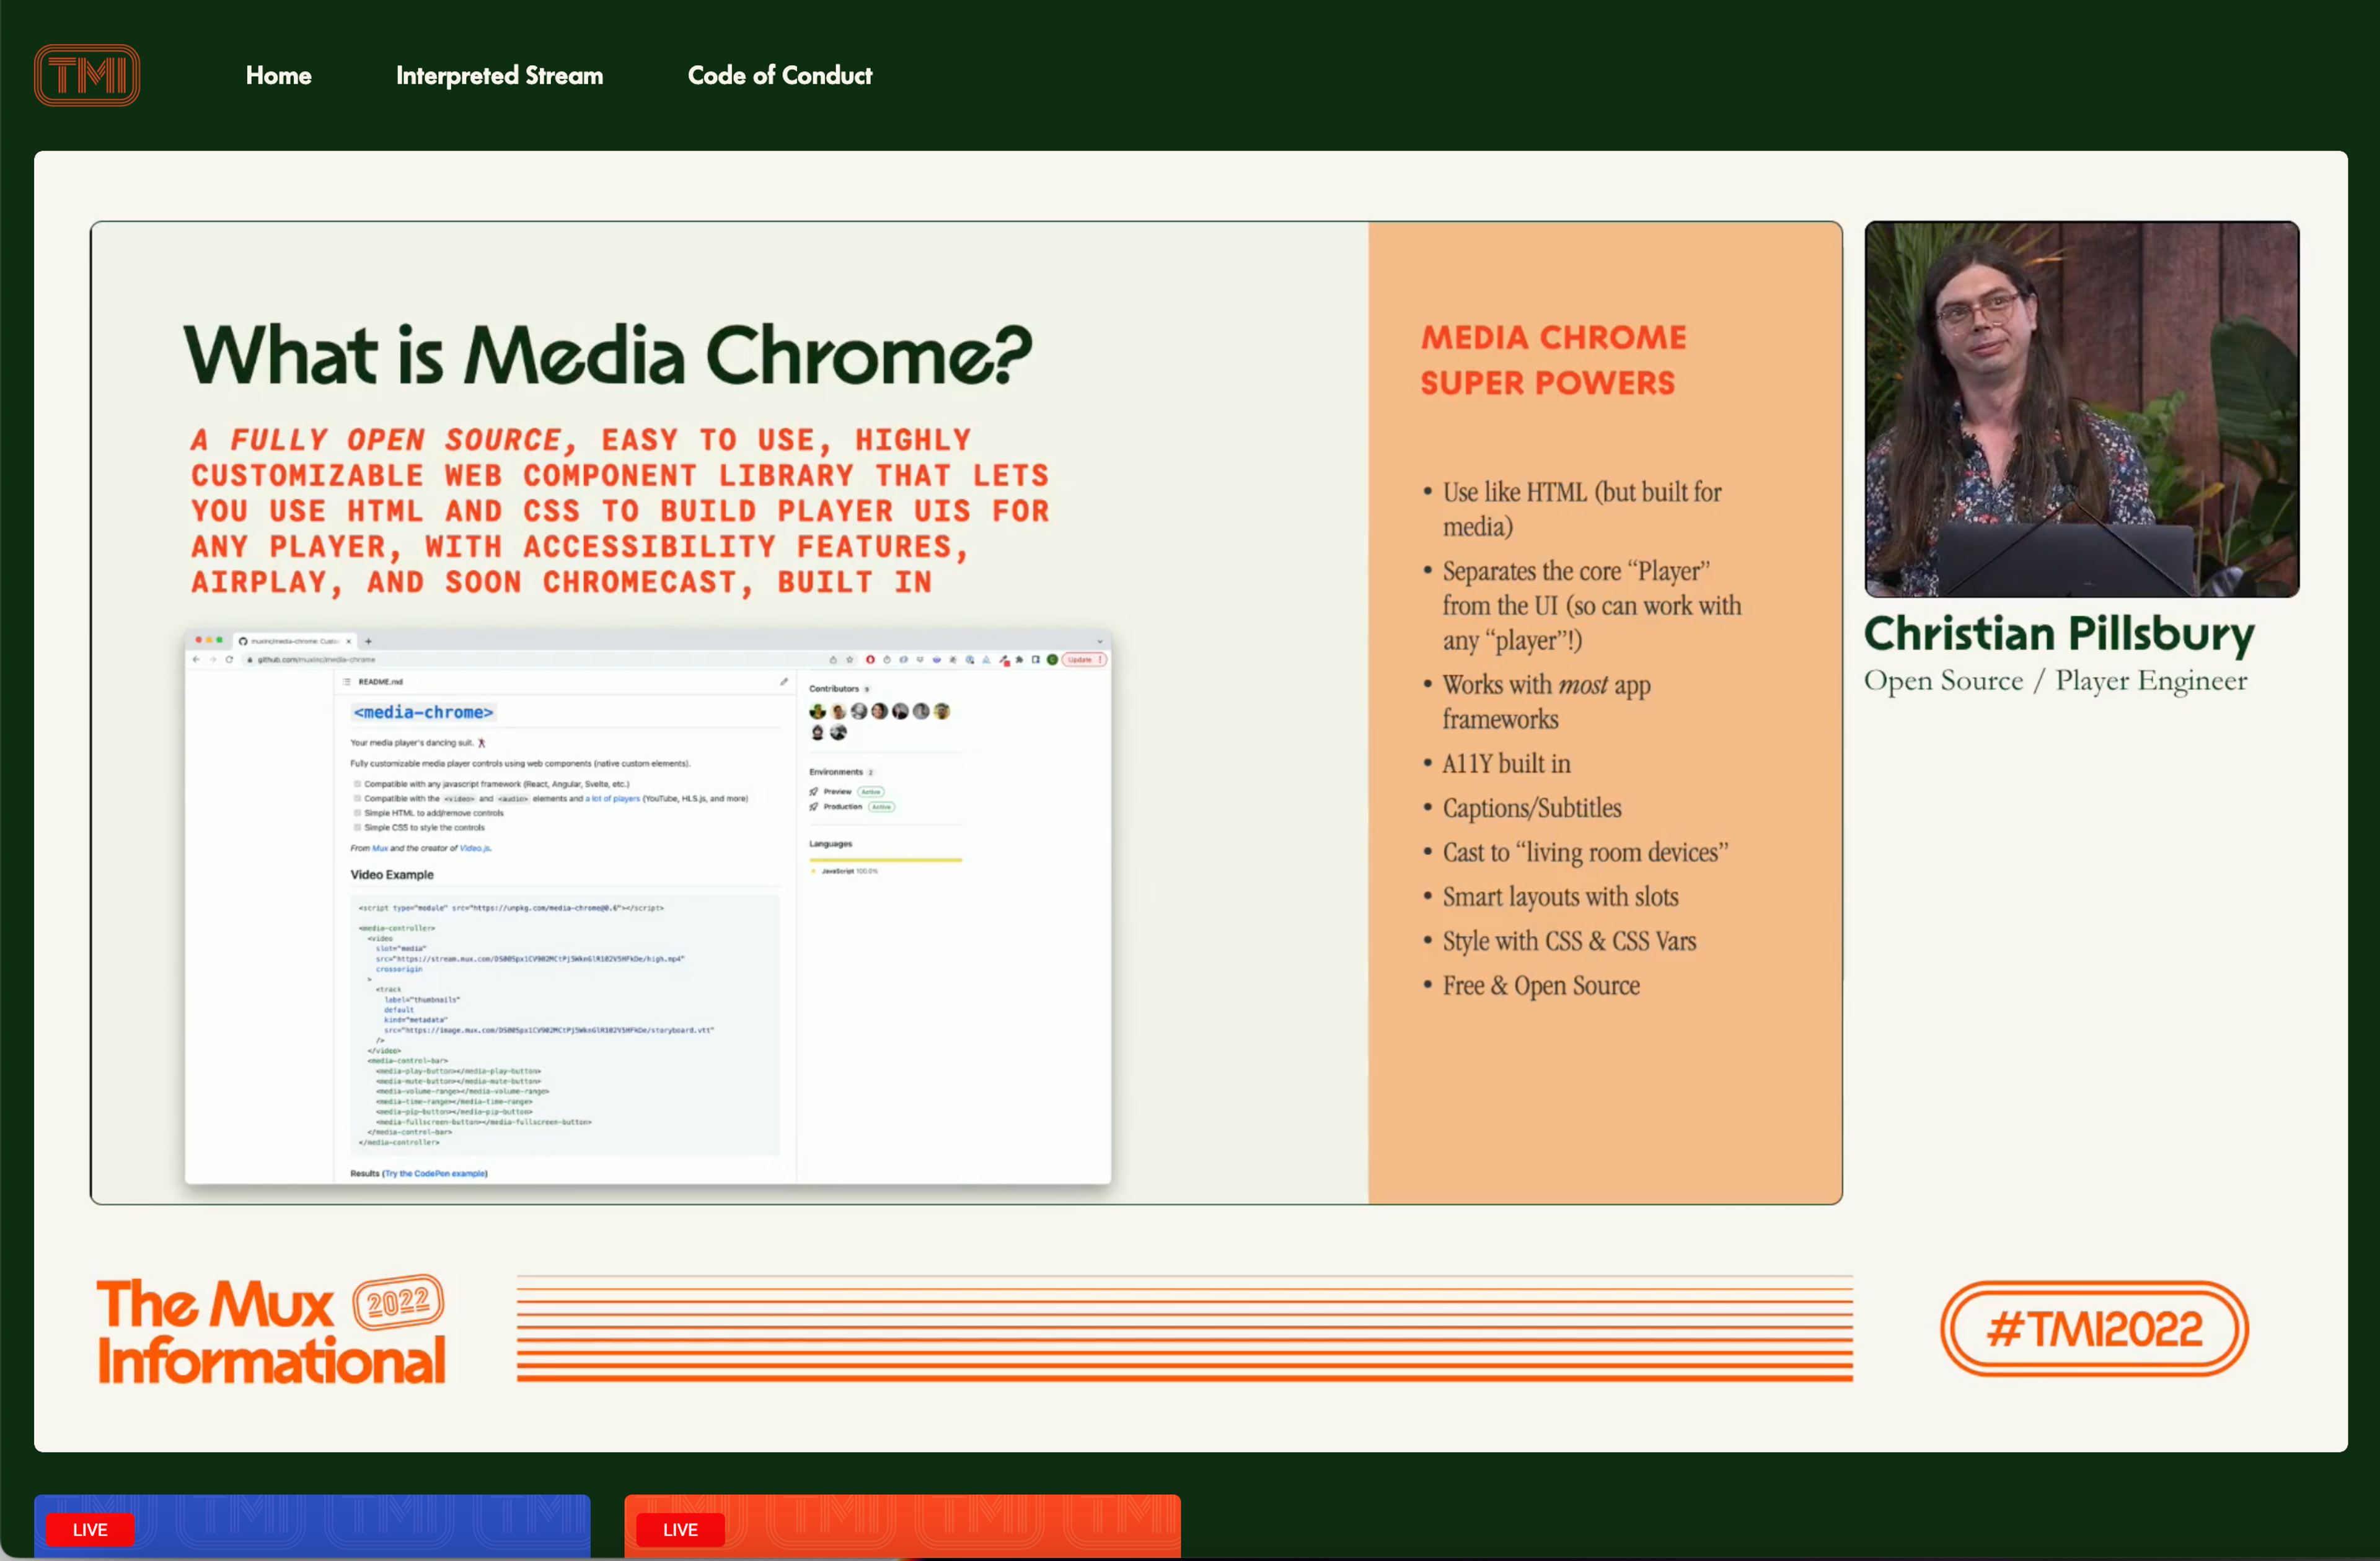 A presentation slide takes up 80% of the picture. It has text that reads, "What is Media Chrome? A fully open source, easy to use, highly customizable web component library that lets you use HTML and CSS to build player UIs for any player, with accessibility features, airplay, and soon chromecast, built in." Media chrome super powers are also listed in small font. A man with glasses and long-hair, named Christian Pillsbury (Open Source / Player Engineer) is depicted speaking on stage.